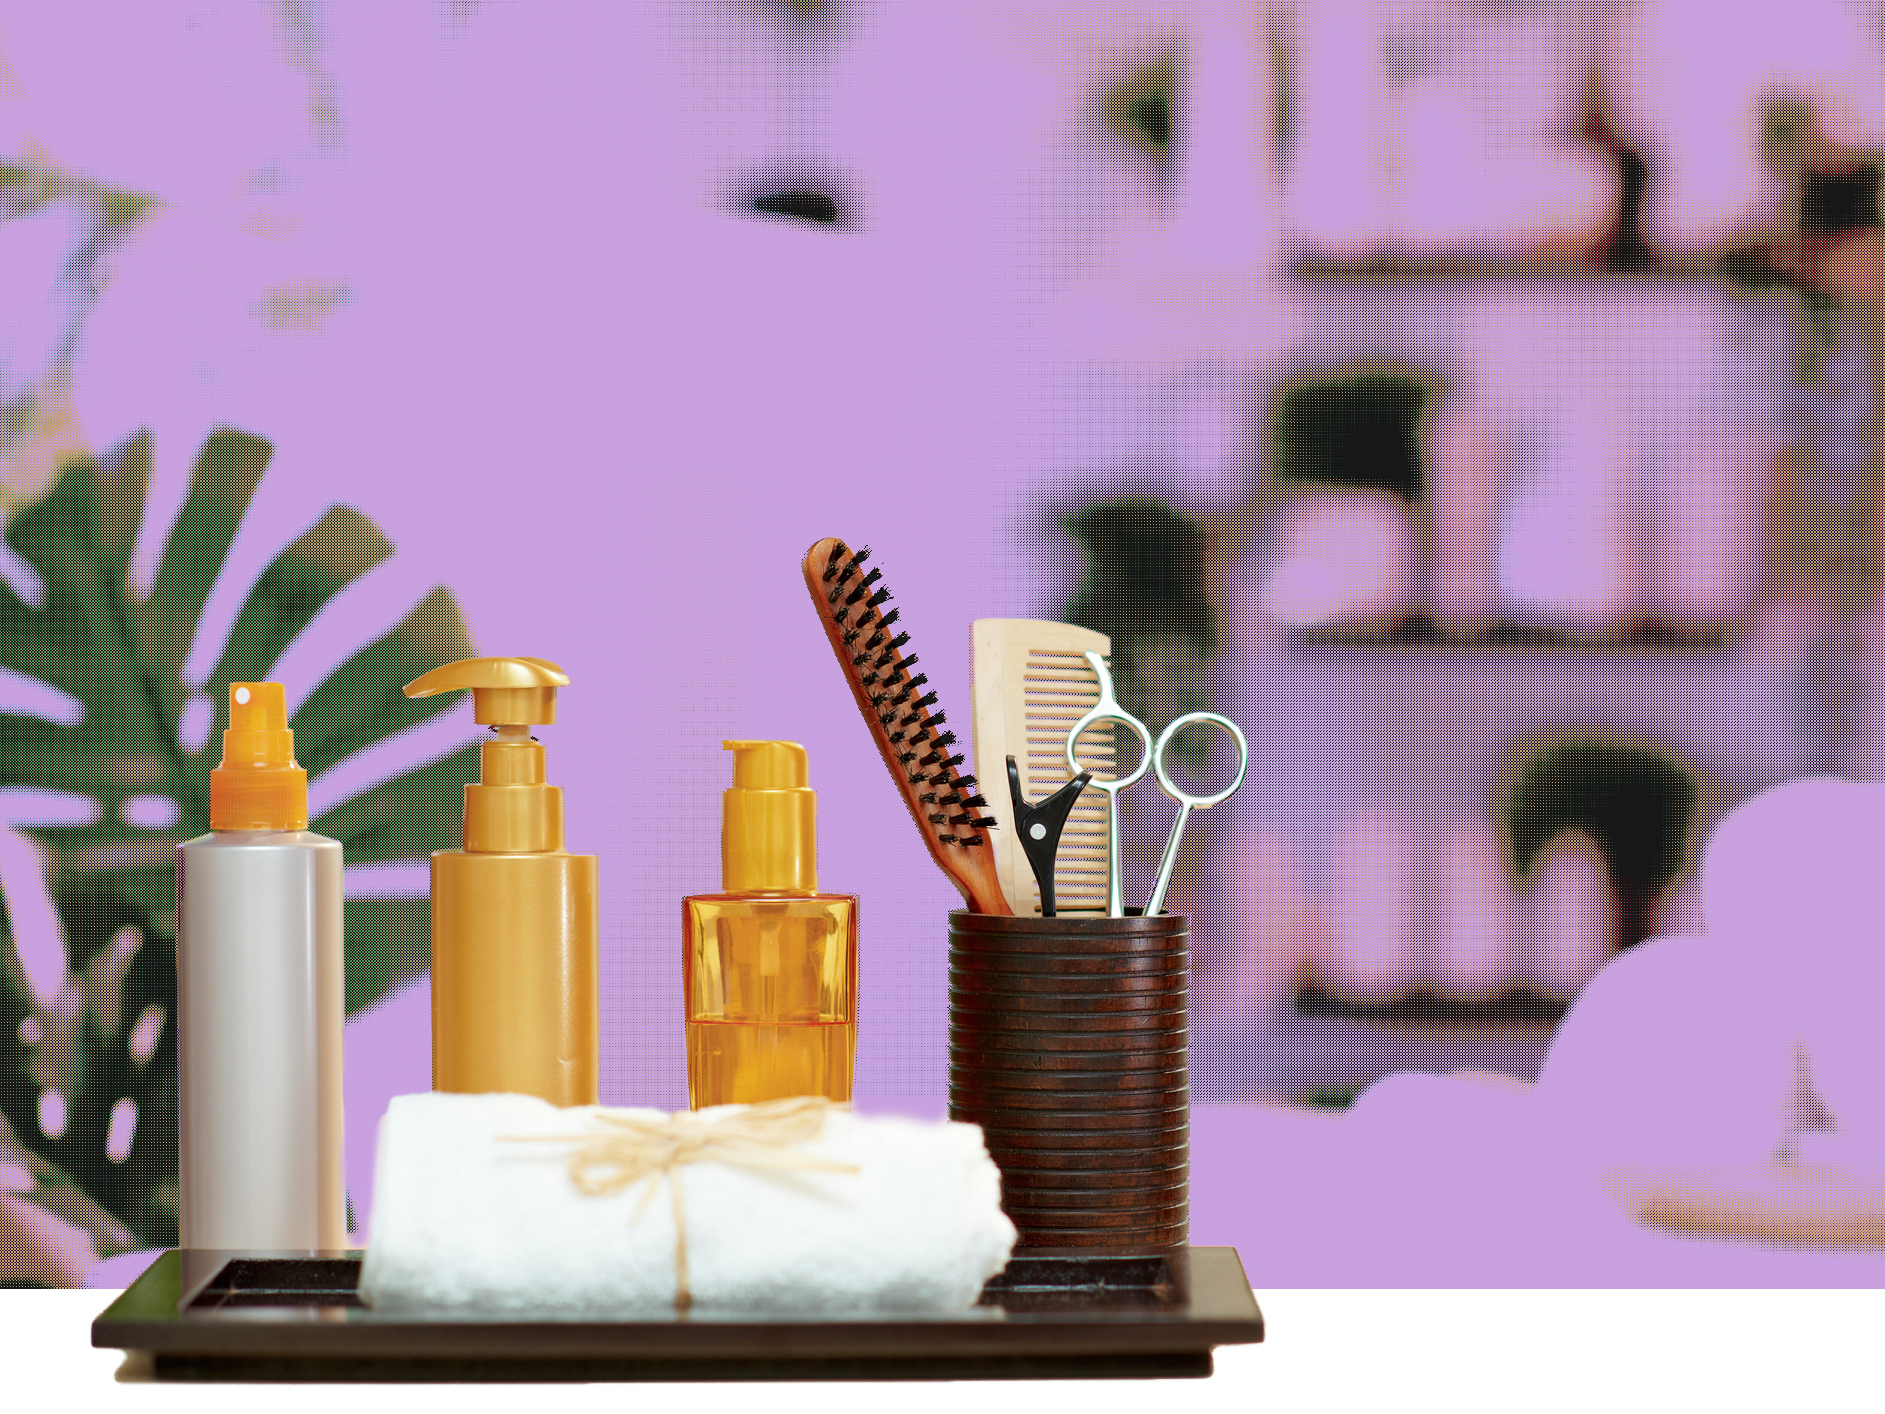 Monthly salon expenses for products